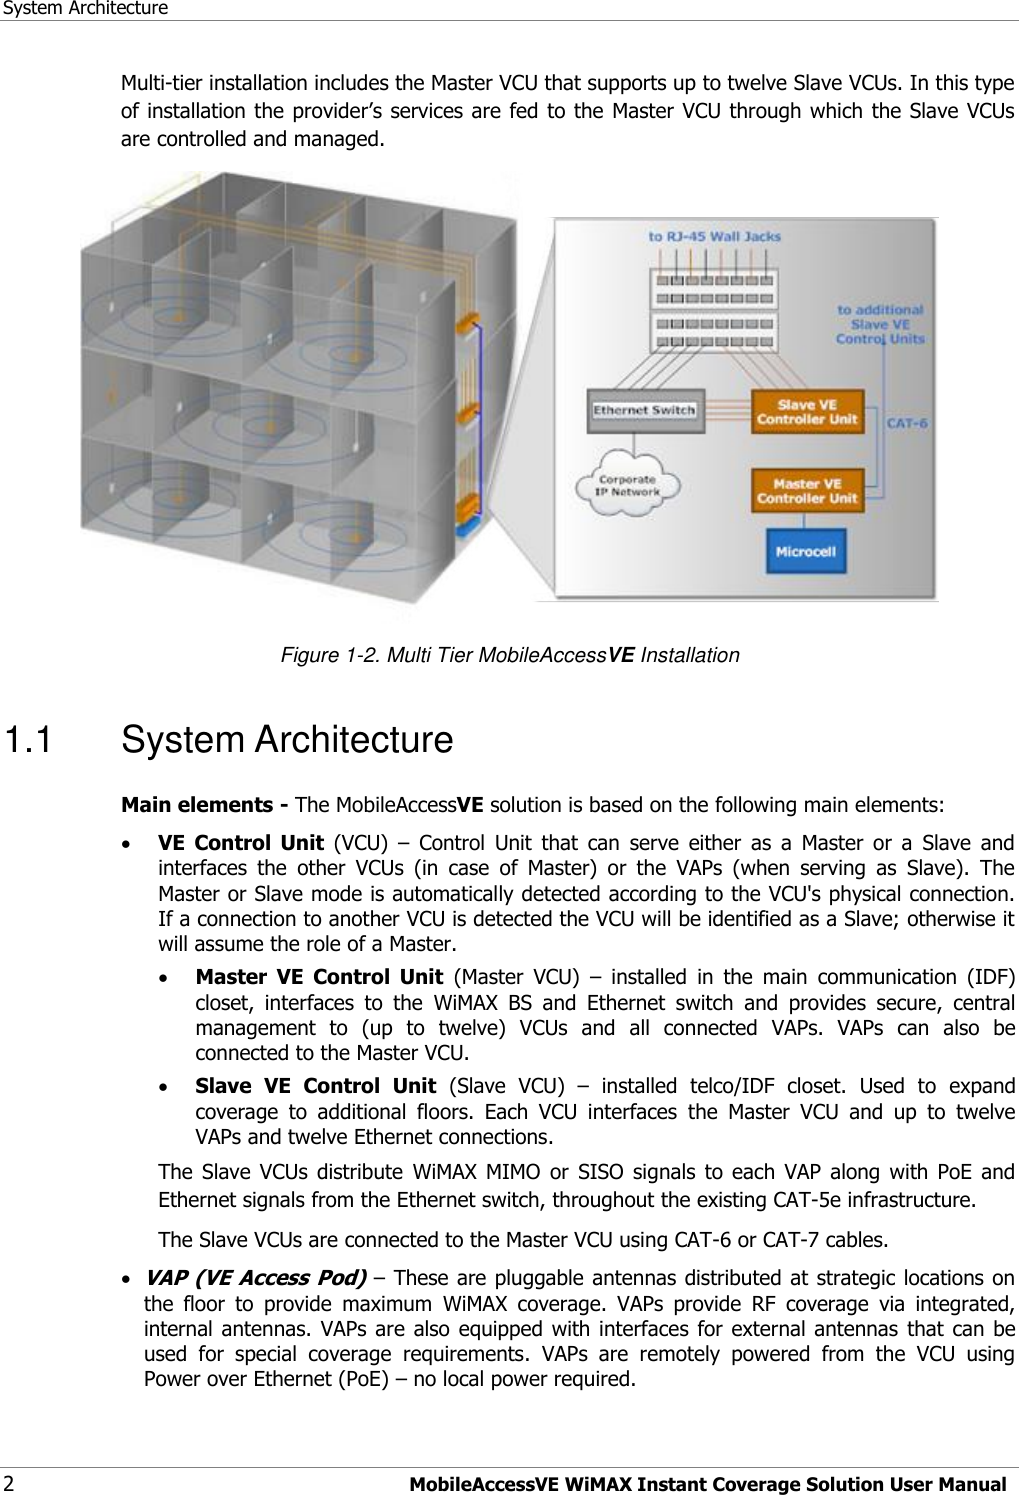 System Architecture 2  MobileAccessVE WiMAX Instant Coverage Solution User Manual Multi-tier installation includes the Master VCU that supports up to twelve Slave VCUs. In this type of installation the provider‟s services are fed to the  Master VCU through which the Slave VCUs are controlled and managed.  Figure 1-2. Multi Tier MobileAccessVE Installation 1.1  System Architecture Main elements - The MobileAccessVE solution is based on the following main elements:   VE  Control  Unit  (VCU)  –  Control  Unit  that  can  serve  either  as  a  Master  or  a  Slave  and interfaces  the  other  VCUs  (in  case  of  Master)  or  the  VAPs  (when  serving  as  Slave).  The Master or Slave mode is automatically detected according to the VCU&apos;s physical connection. If a connection to another VCU is detected the VCU will be identified as a Slave; otherwise it will assume the role of a Master.  Master  VE  Control  Unit  (Master  VCU)  –  installed  in  the  main  communication  (IDF) closet,  interfaces  to  the  WiMAX  BS  and  Ethernet  switch  and  provides  secure,  central management  to  (up  to  twelve)  VCUs  and  all  connected  VAPs.  VAPs  can  also  be connected to the Master VCU.  Slave  VE  Control  Unit  (Slave  VCU) –  installed  telco/IDF  closet.  Used  to  expand coverage  to  additional  floors.  Each  VCU  interfaces  the  Master  VCU  and  up  to  twelve VAPs and twelve Ethernet connections. The  Slave  VCUs  distribute  WiMAX  MIMO  or  SISO  signals  to  each  VAP  along  with  PoE  and Ethernet signals from the Ethernet switch, throughout the existing CAT-5e infrastructure.  The Slave VCUs are connected to the Master VCU using CAT-6 or CAT-7 cables.  VAP (VE Access Pod) – These are pluggable antennas distributed at strategic locations on the  floor  to  provide  maximum  WiMAX  coverage.  VAPs  provide  RF  coverage  via  integrated, internal antennas.  VAPs  are also  equipped with  interfaces for external antennas  that can  be used  for  special  coverage  requirements.  VAPs  are  remotely  powered  from  the  VCU  using Power over Ethernet (PoE) – no local power required. 